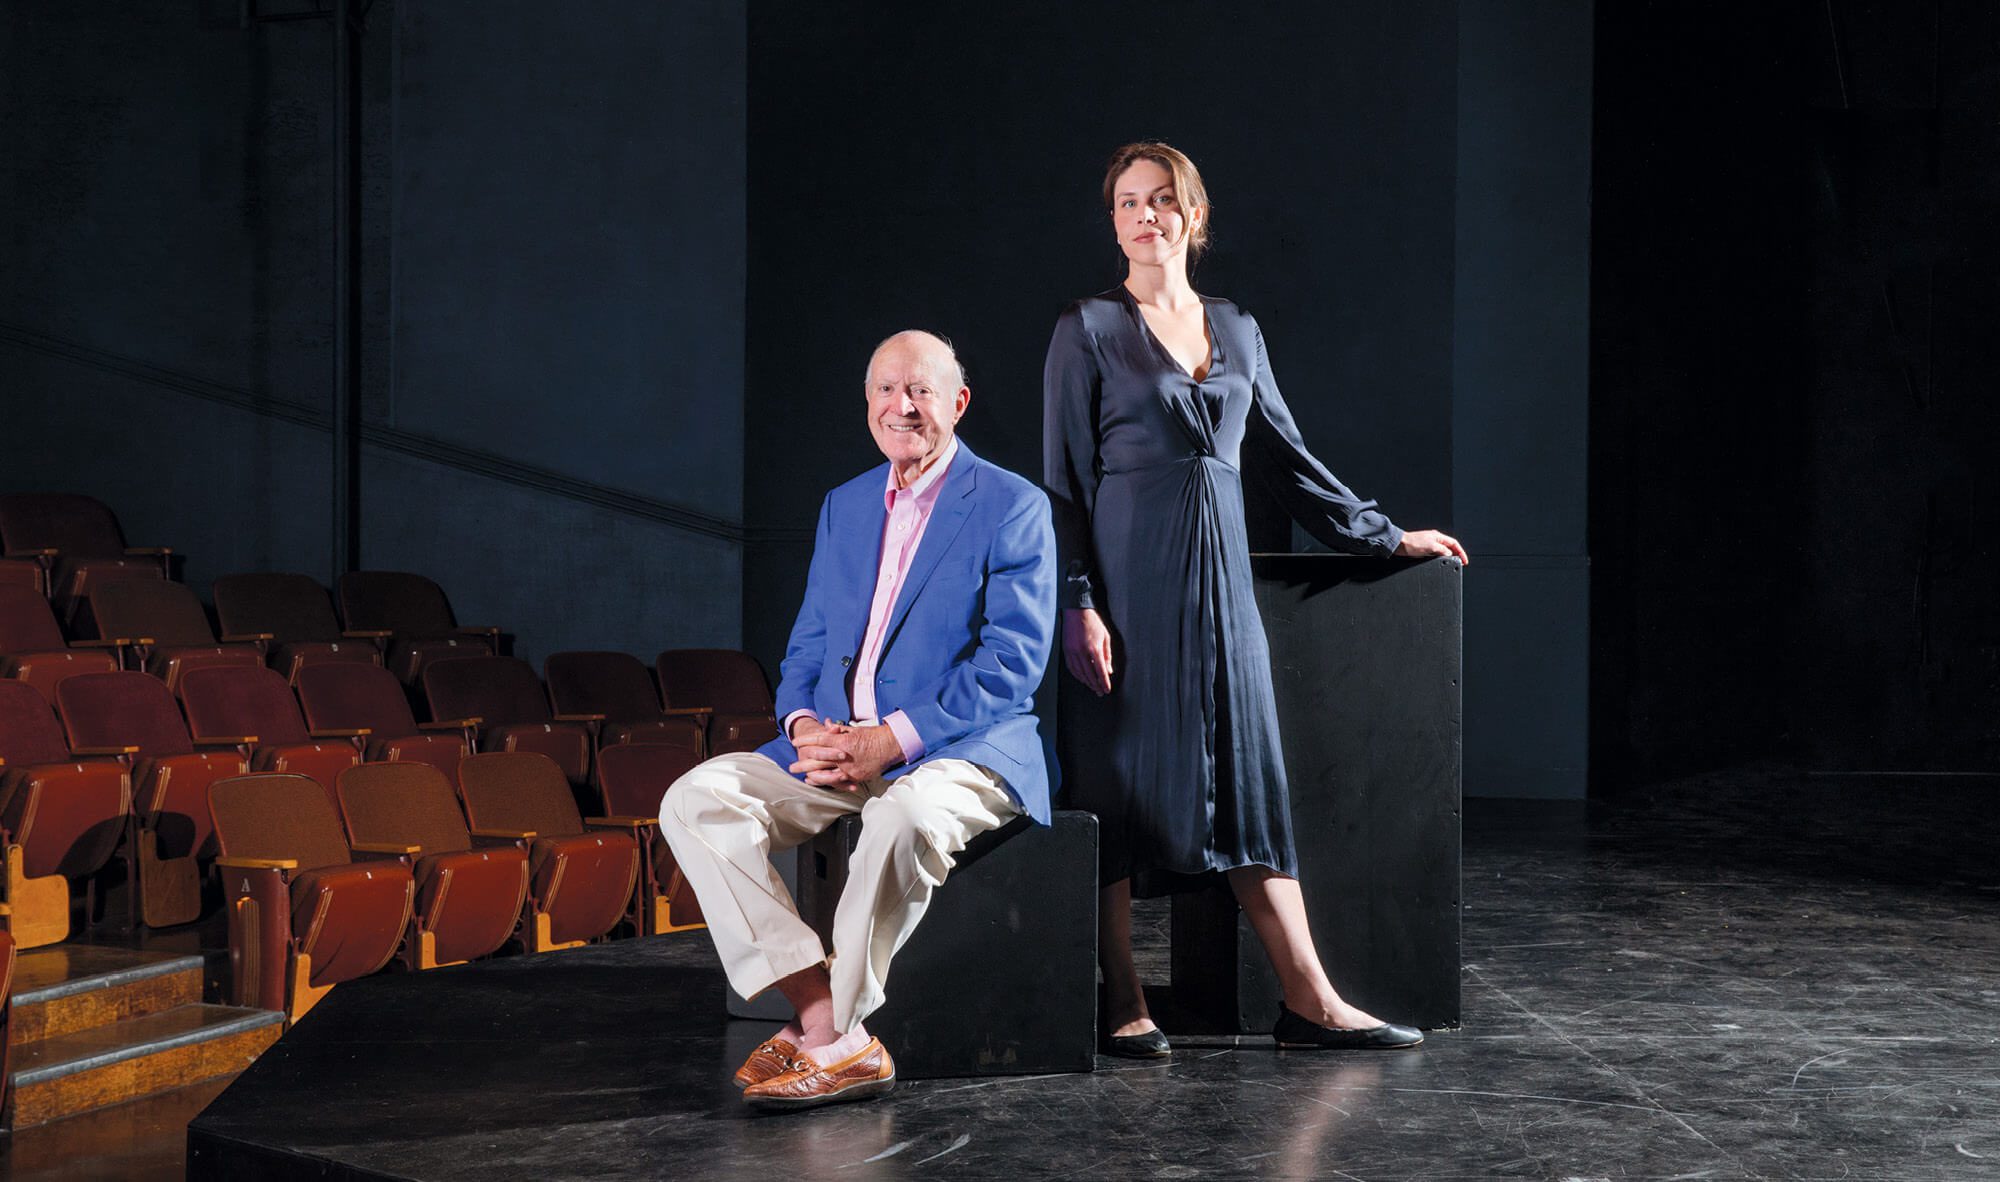 Tom Tusher, a former member of the Haas School Board, and Asha Culhane- Husain, BS 18 pictured together on the stage of a theater